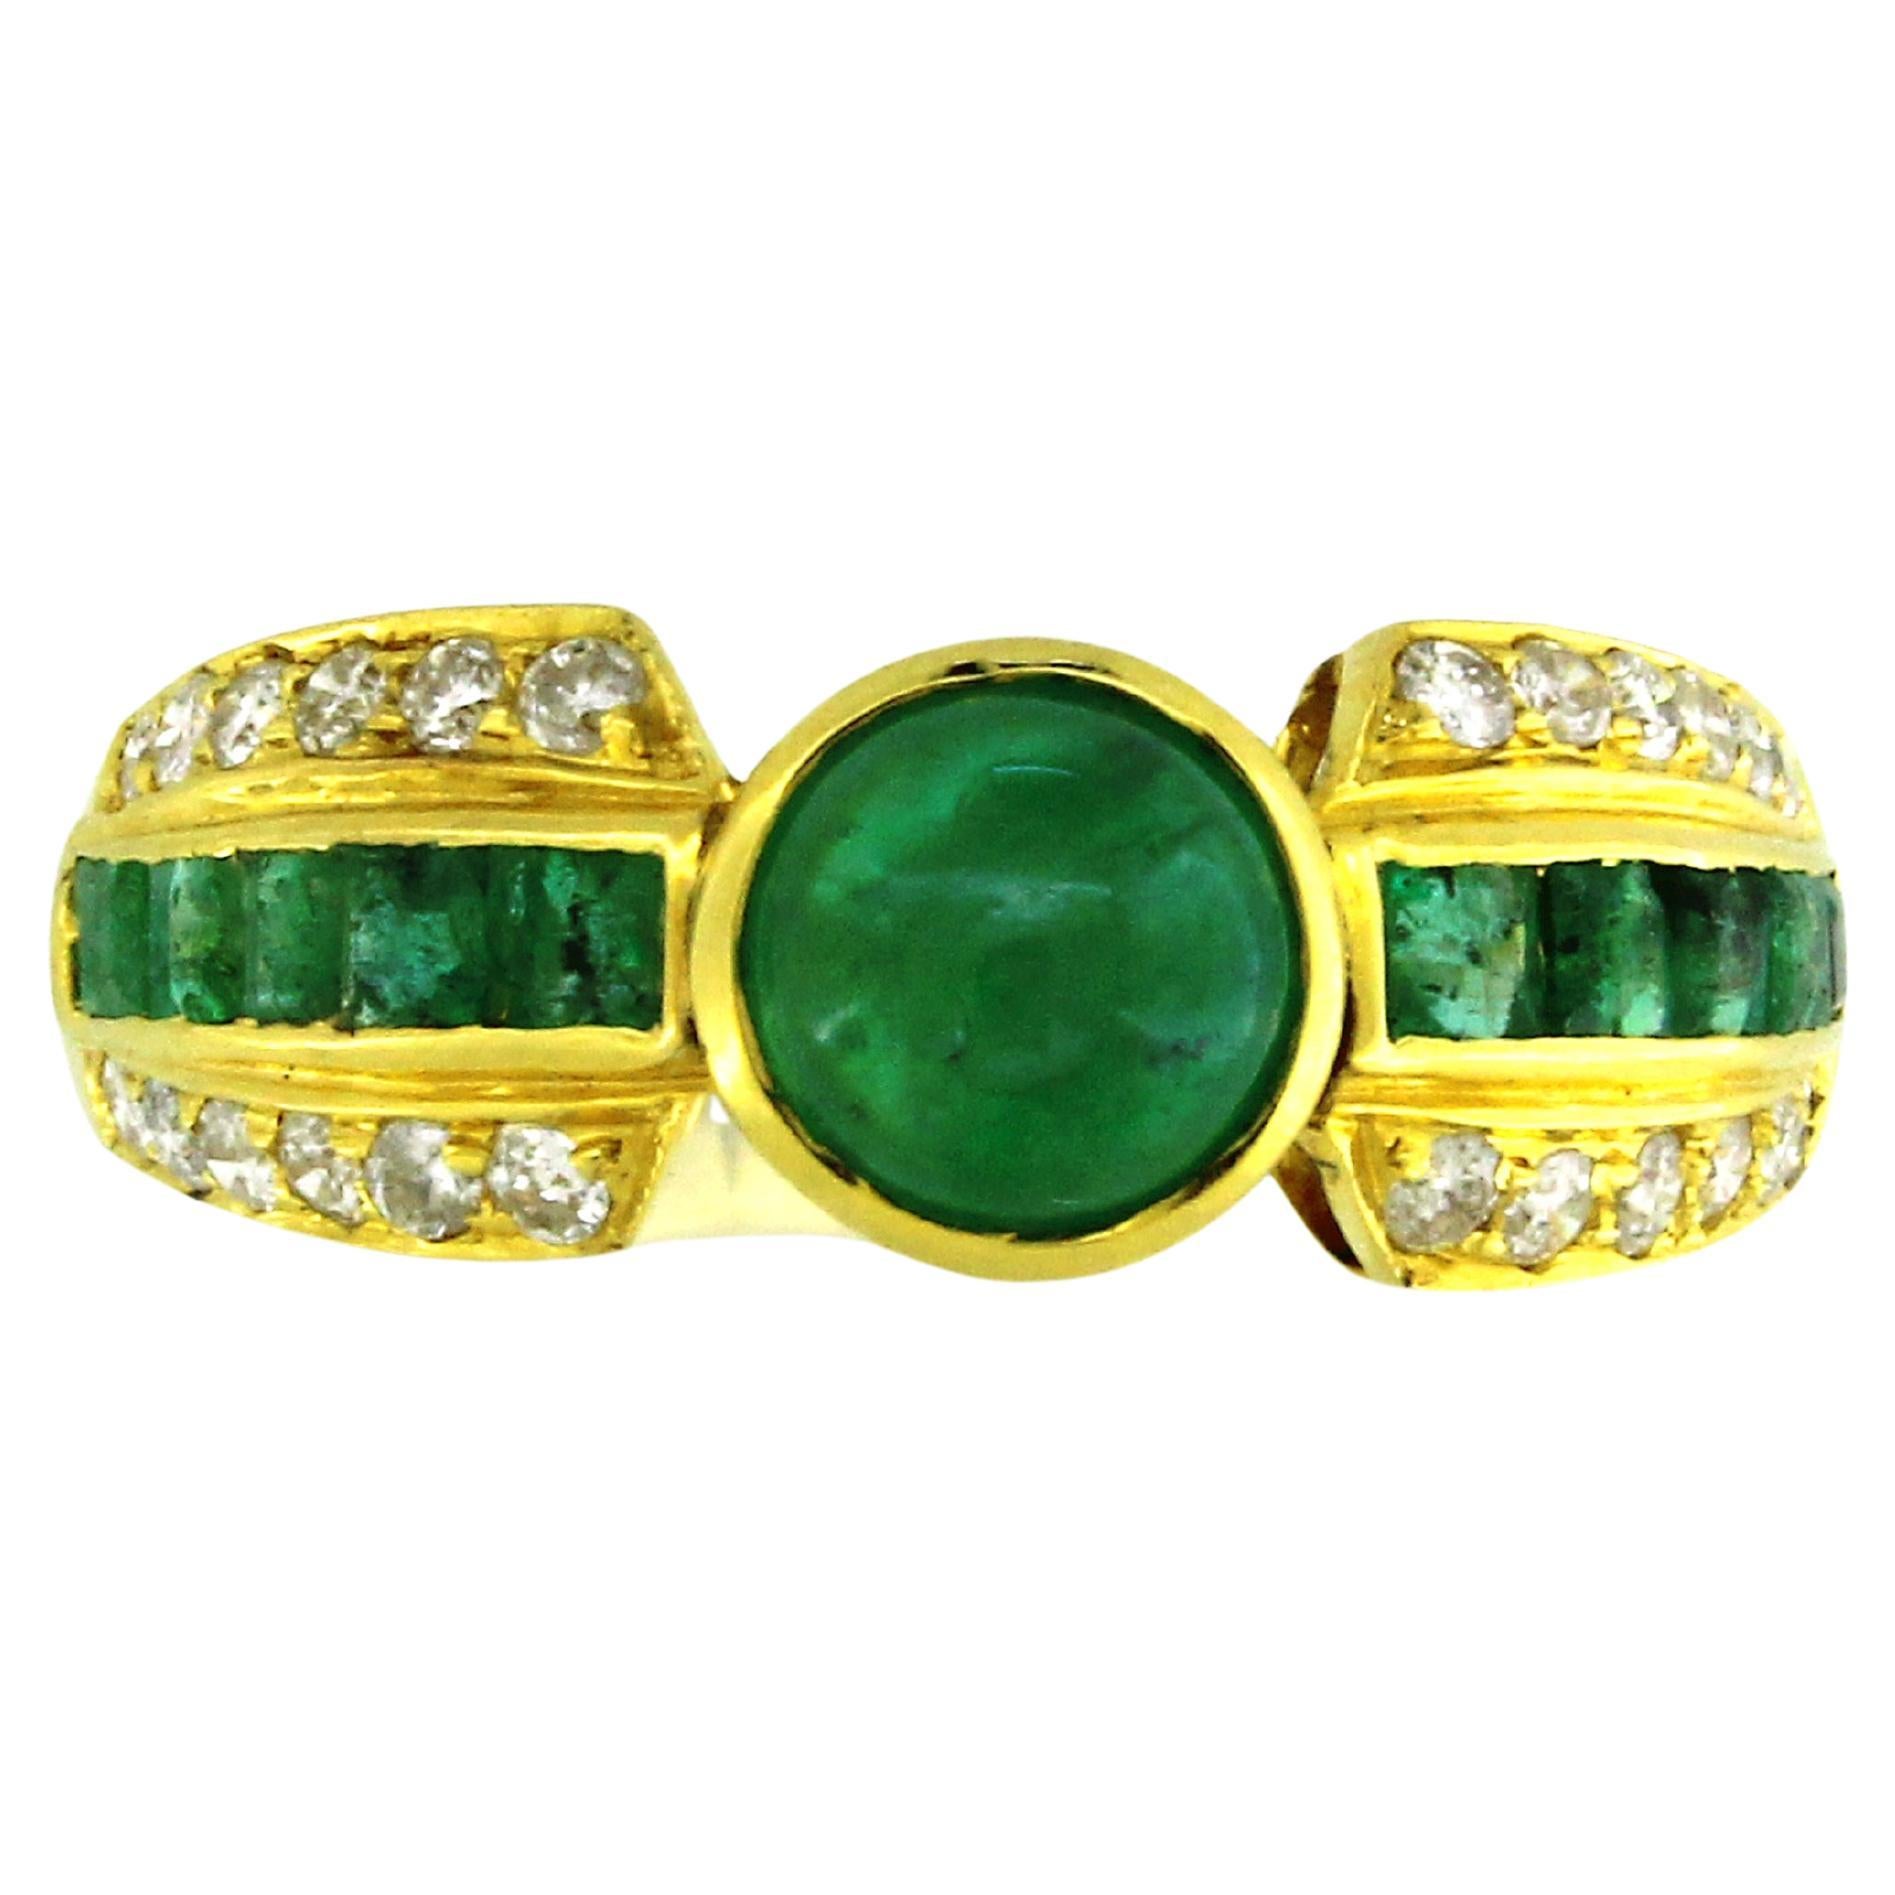 1.58 carats of Emerald Ring